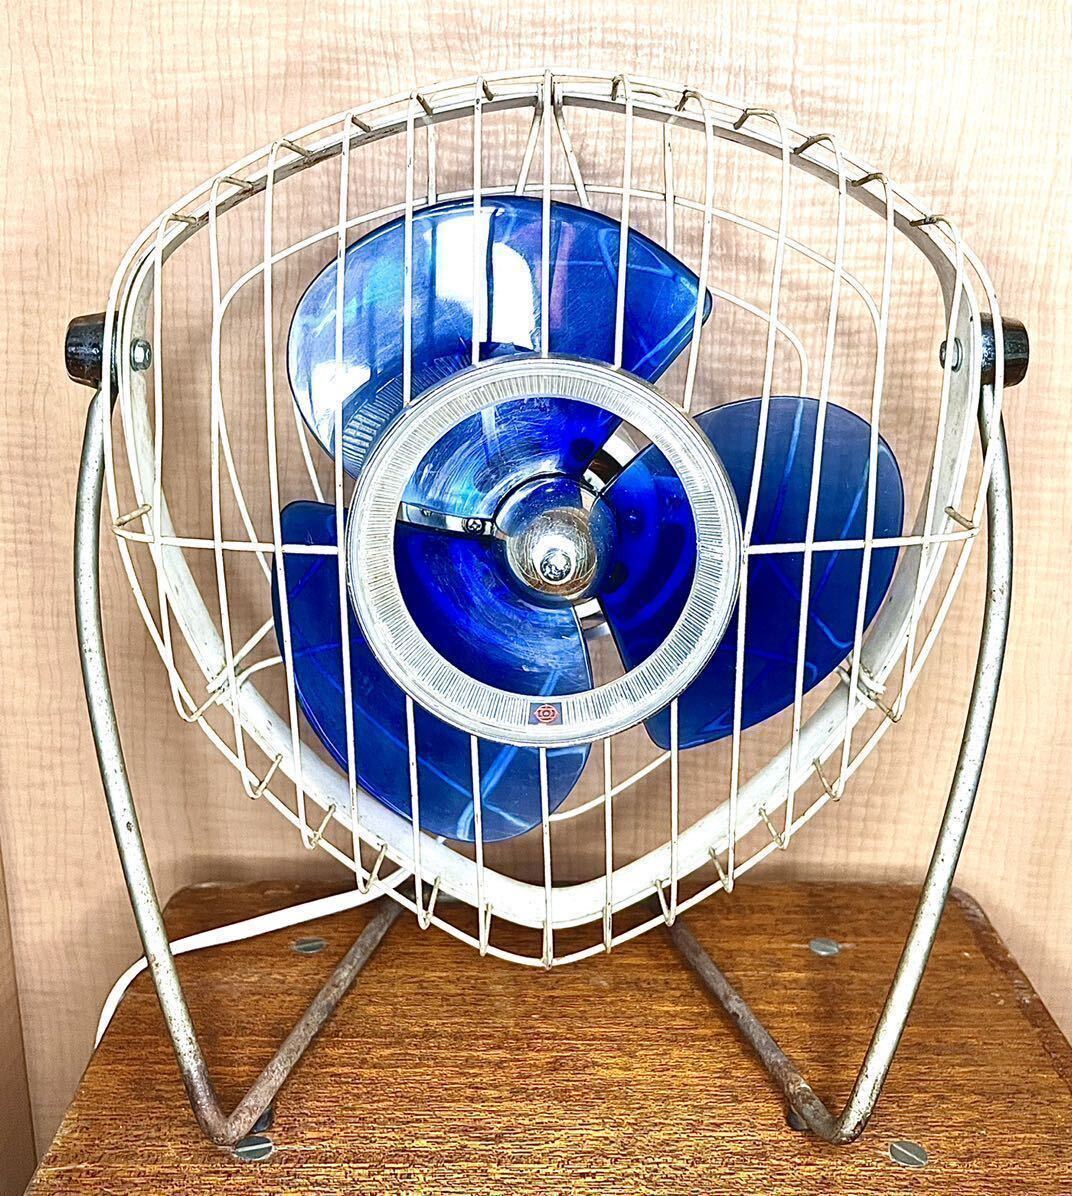  rare Showa Retro Hitachi desk electric fan transparent blue 20cm D-496 inspection service completed operation goods desk fan lovely antique consumer electronics that time thing 